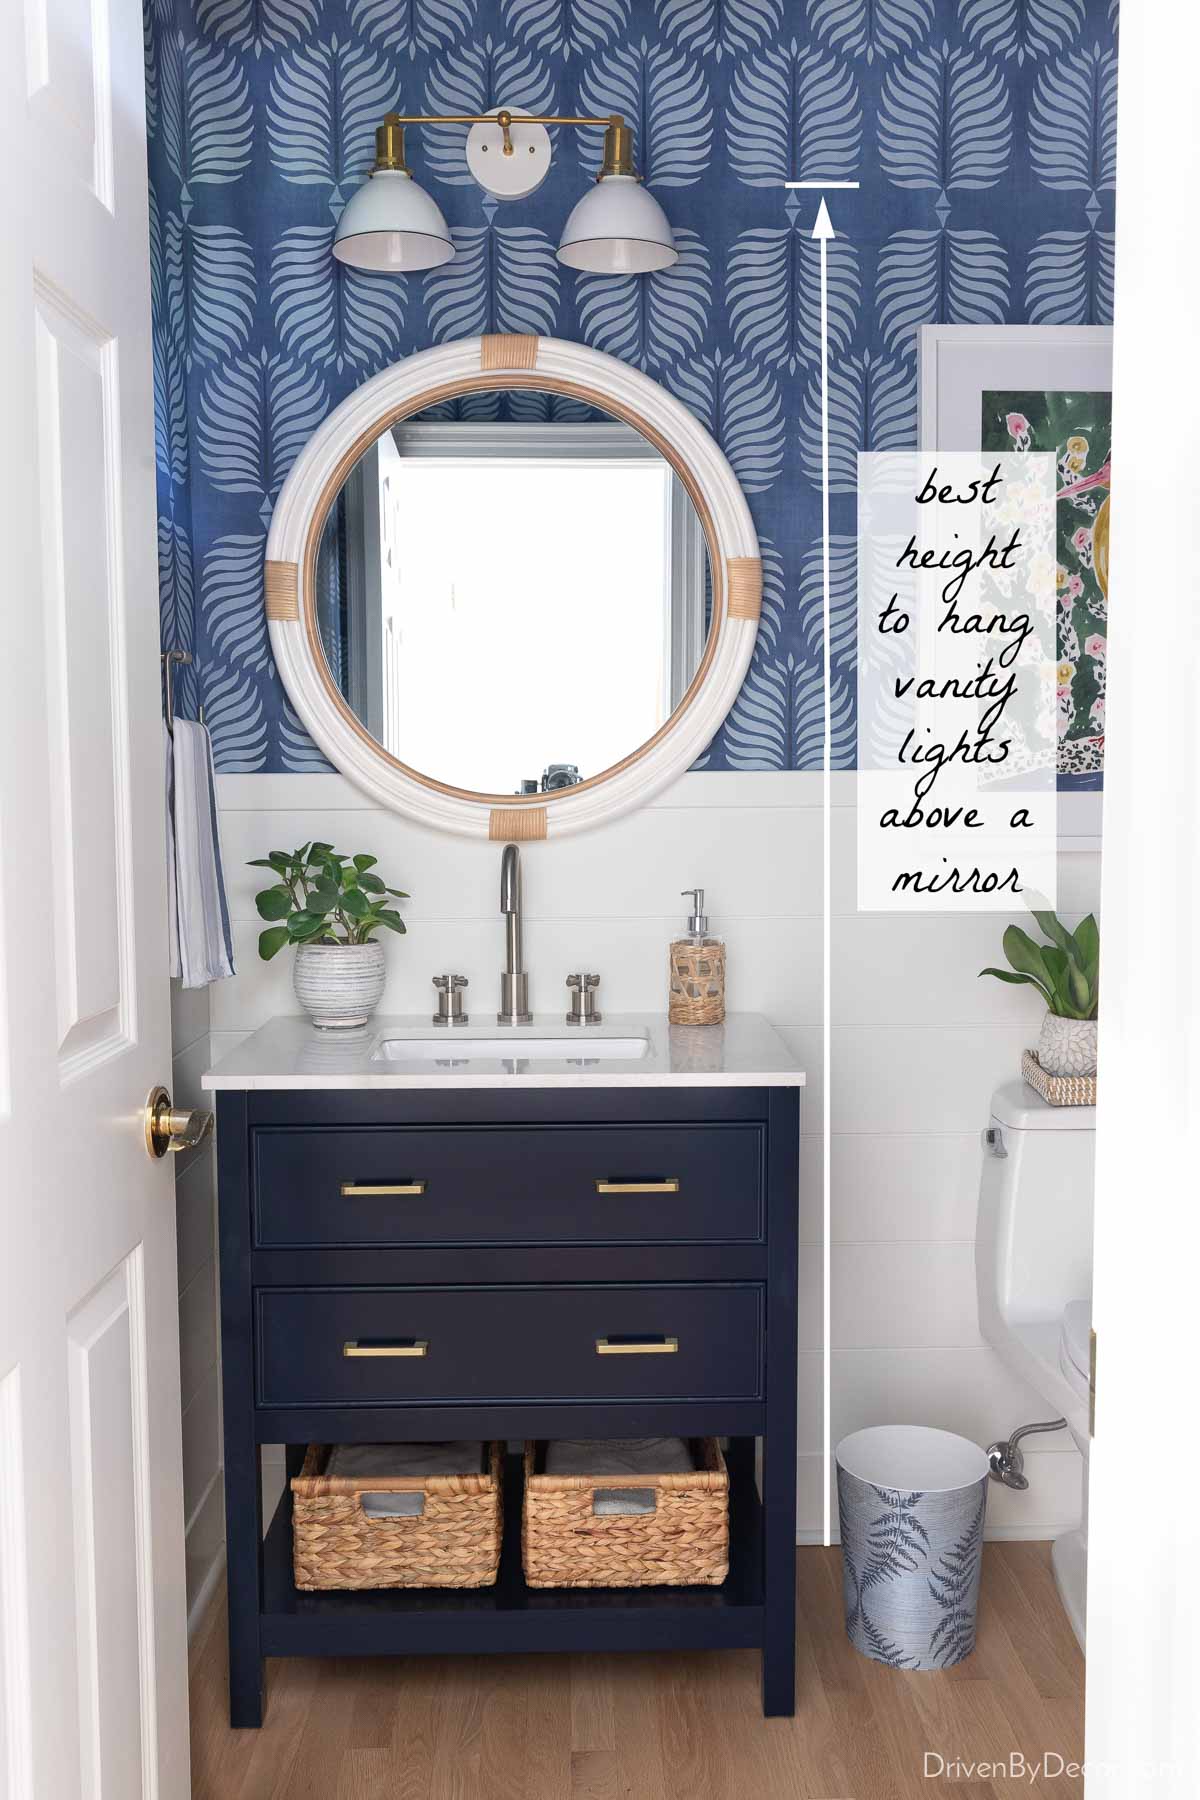 Vanity lights above round mirror and single vanity - shows how high to hang them